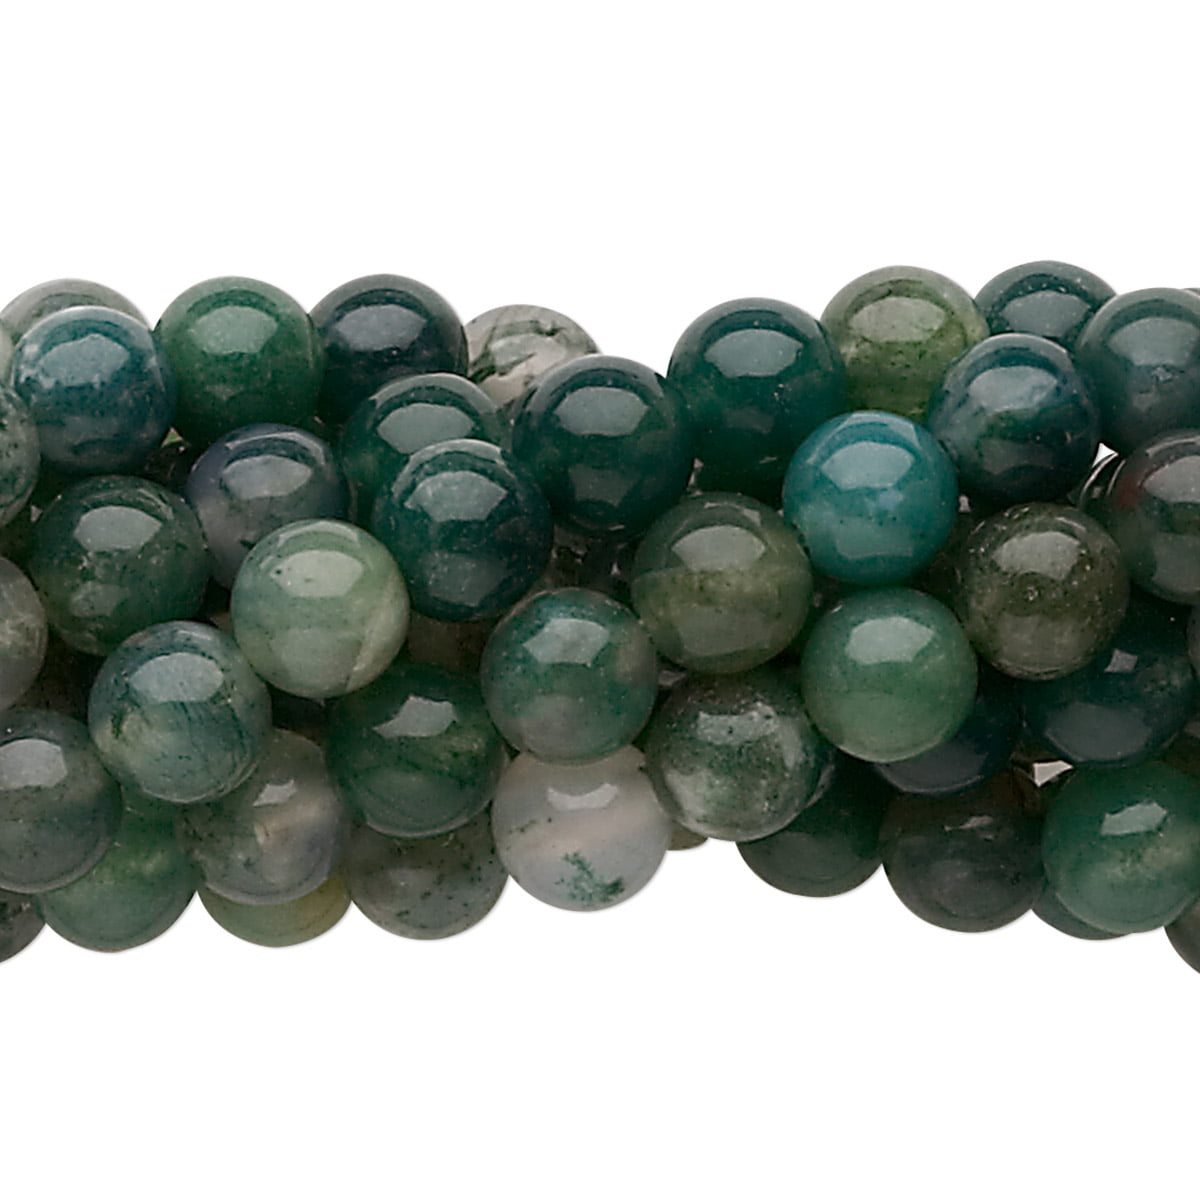 Grade A Frosted Black Agate Glass Loose Beads 6mm Round 